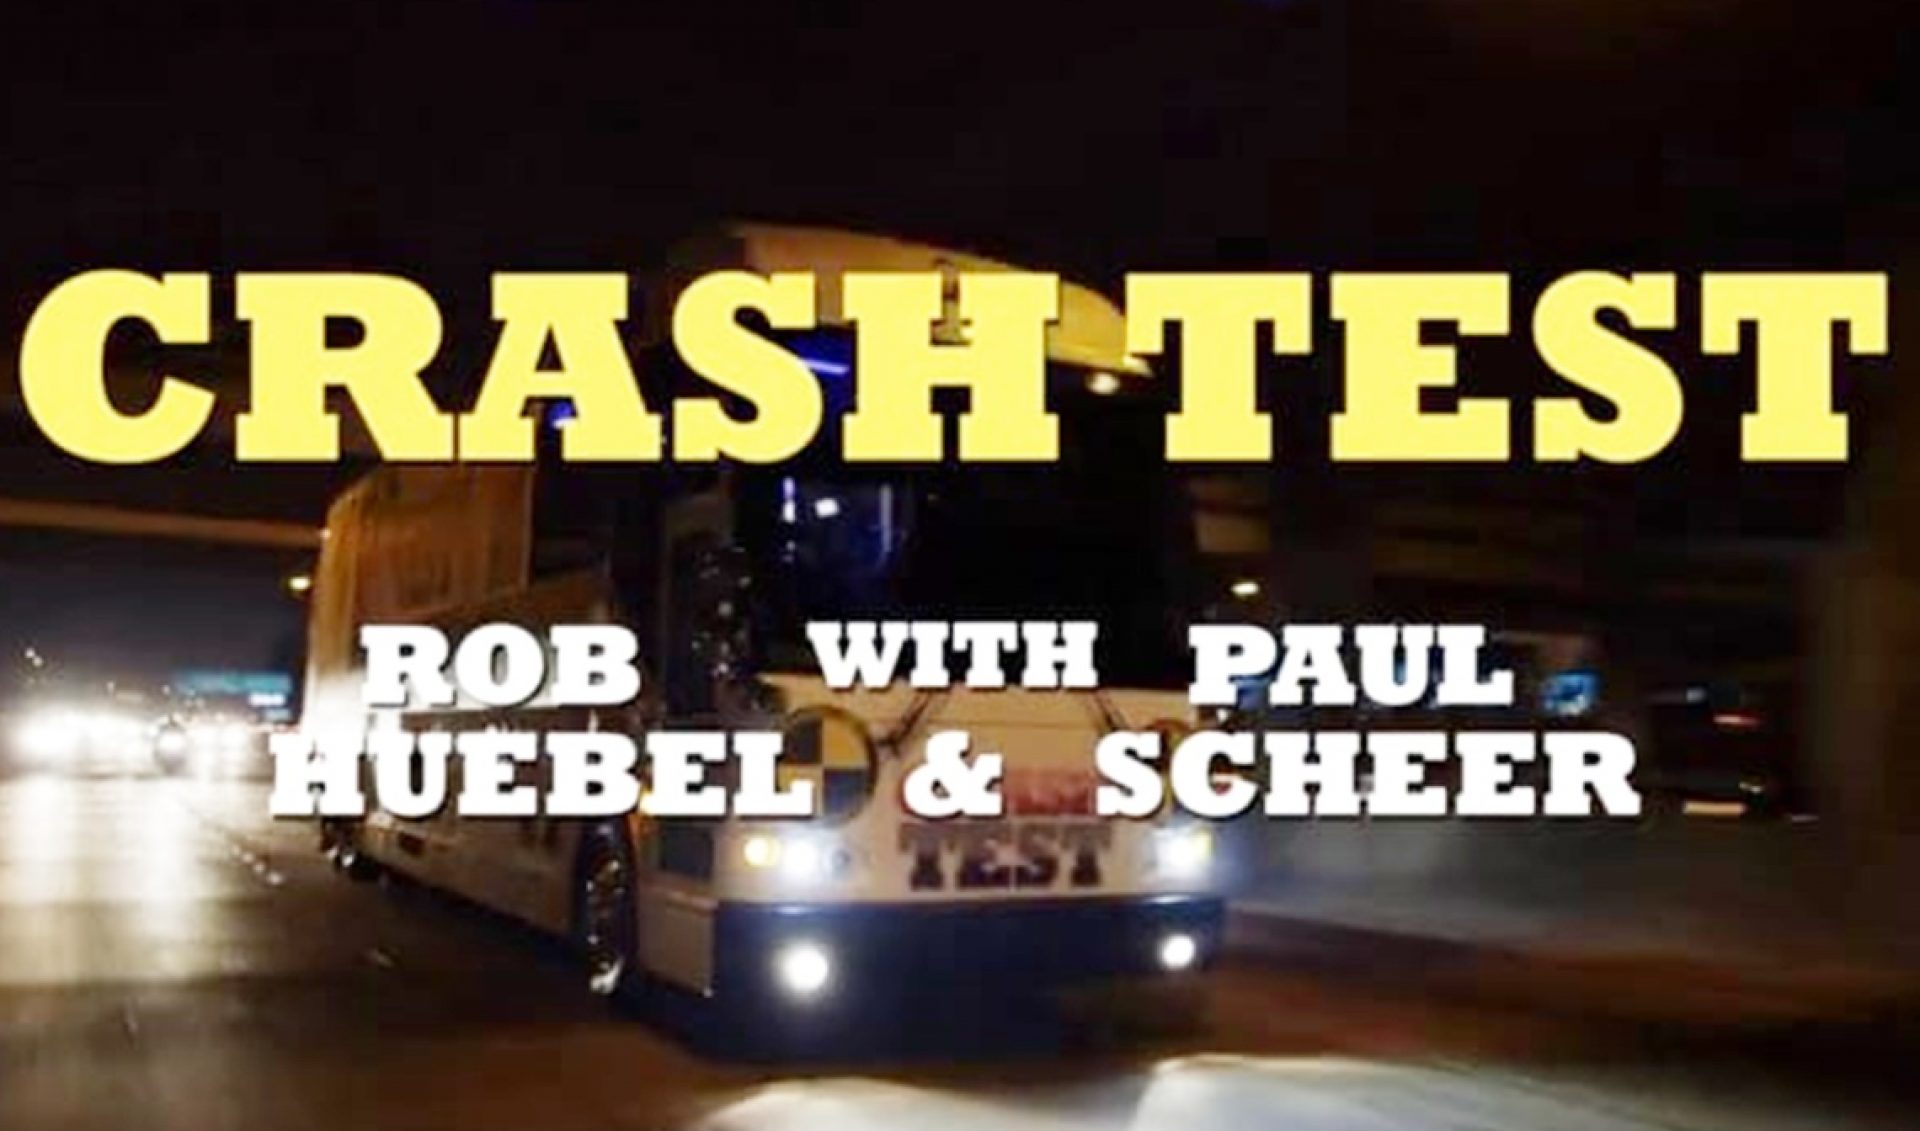 Paramount Digital To Premiere ‘Crash Test’ Comedy Special With Vimeo